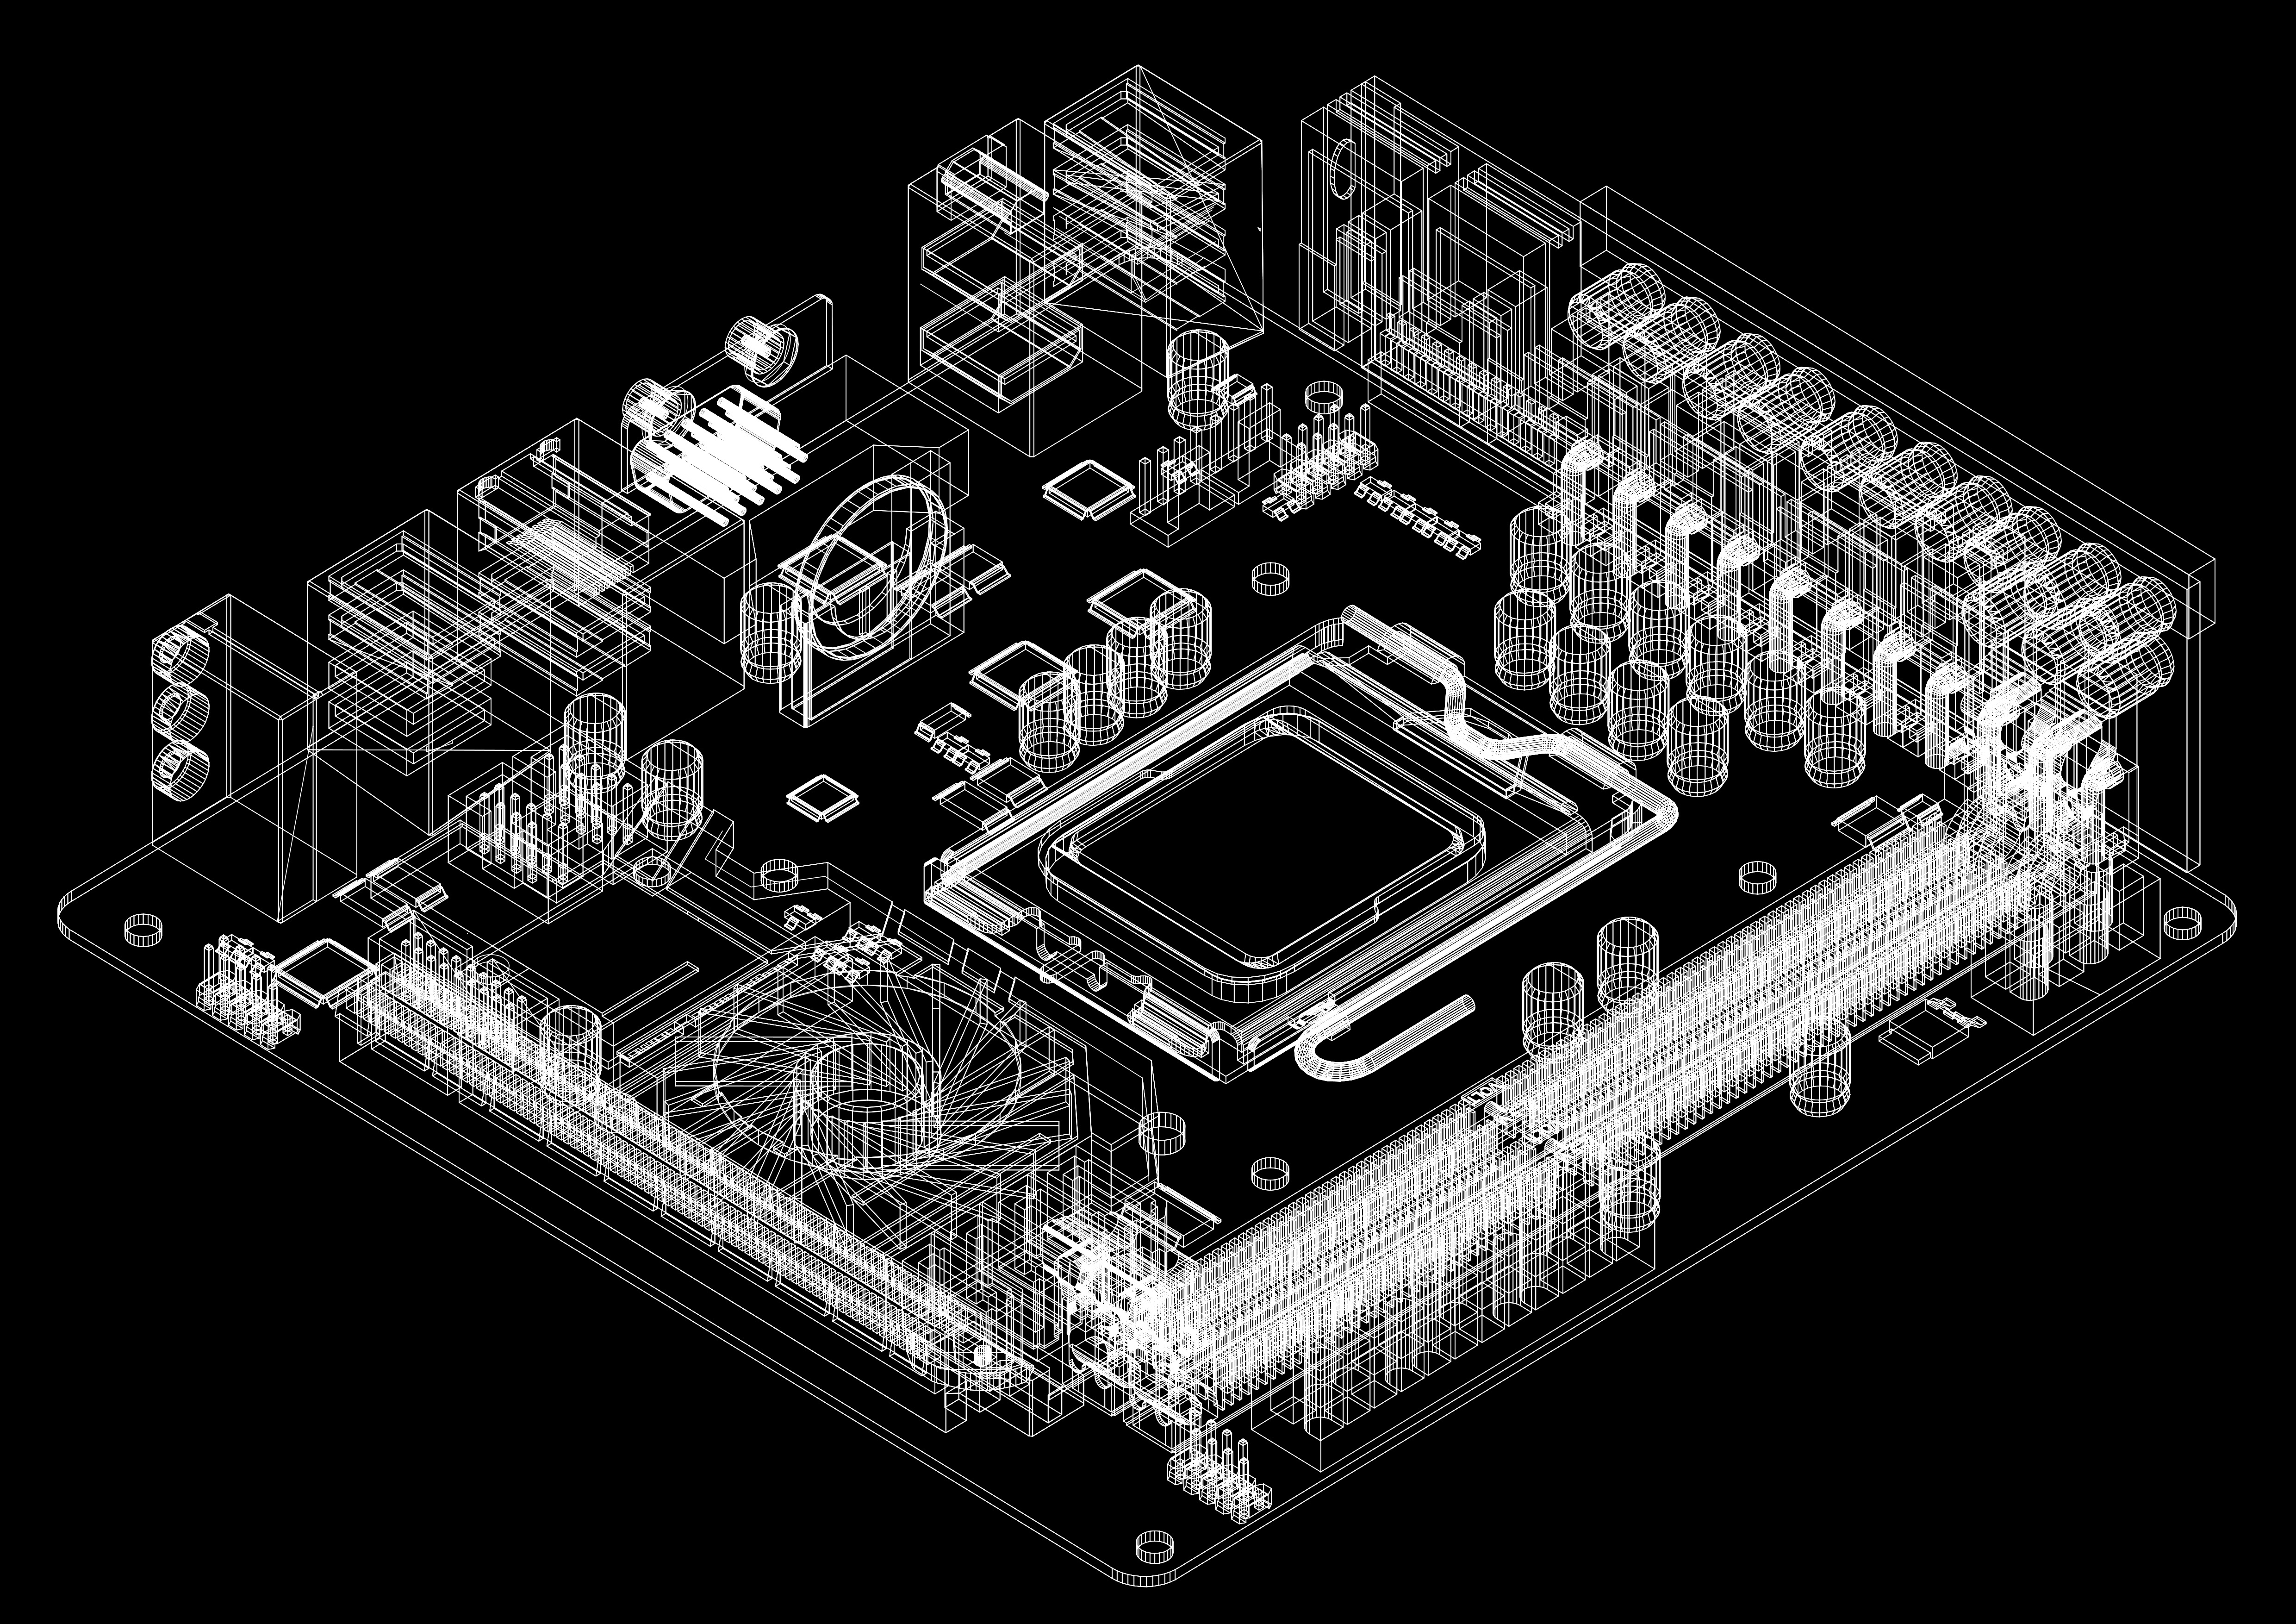 3D model for a computer motherboard.